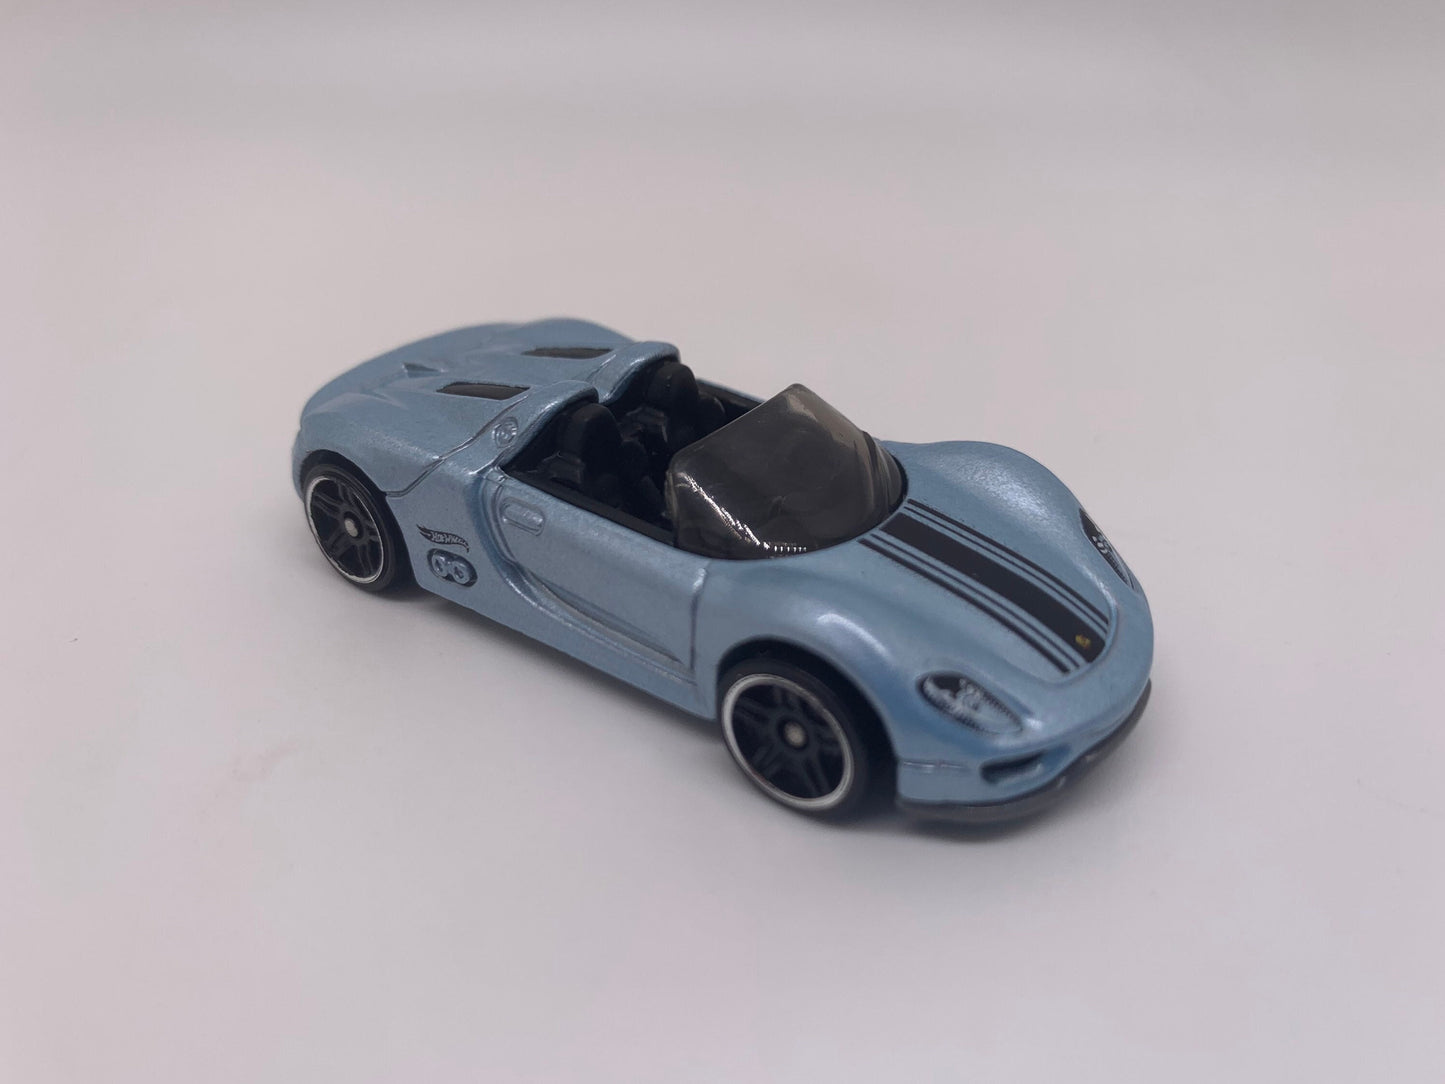 Hot Wheels Porsche 918 Spyder Concept Pearl Light Blue HW Exotics Perfect Birthday Gift Miniature Collectable Model Toy Car